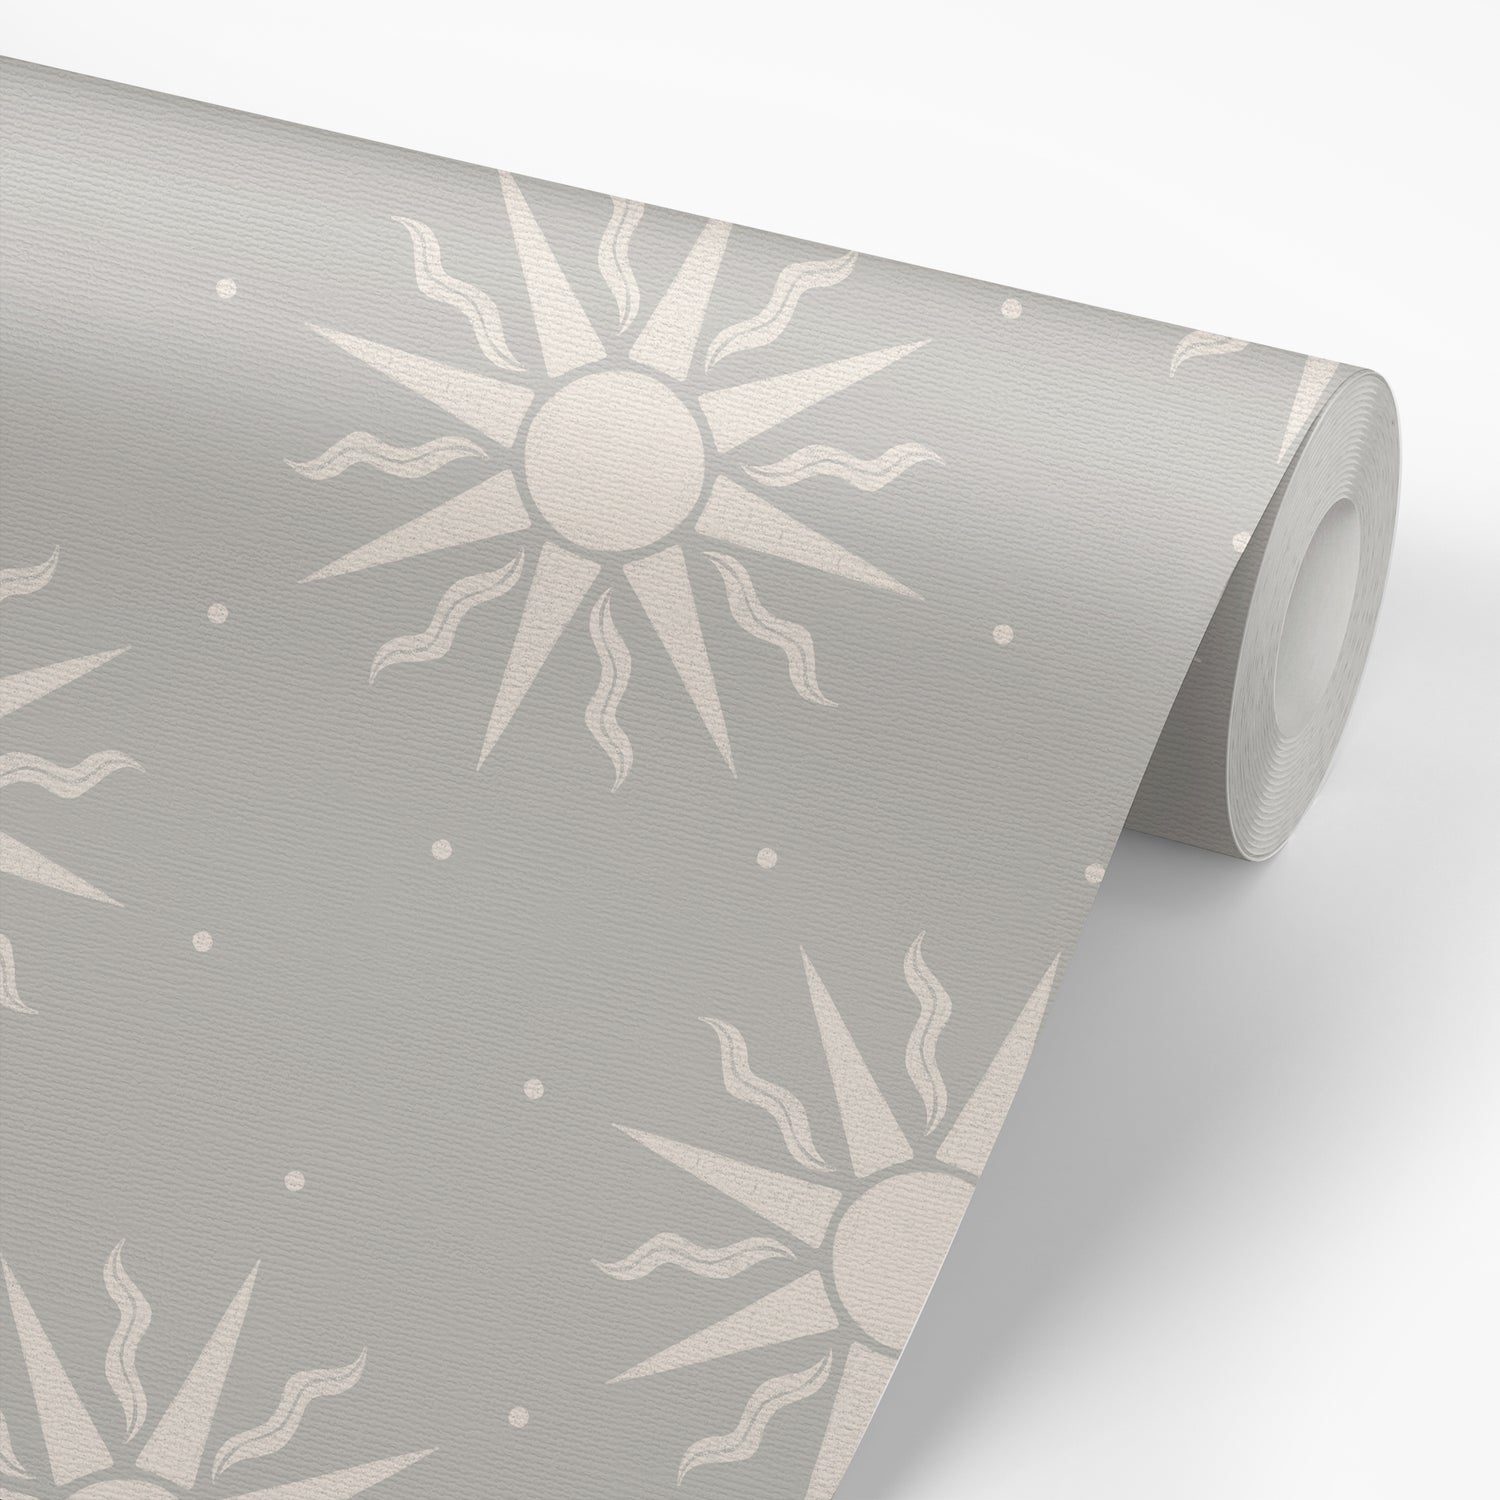 Sunny Suns Wallpaper in Gray shown on a roll of wallpaper.